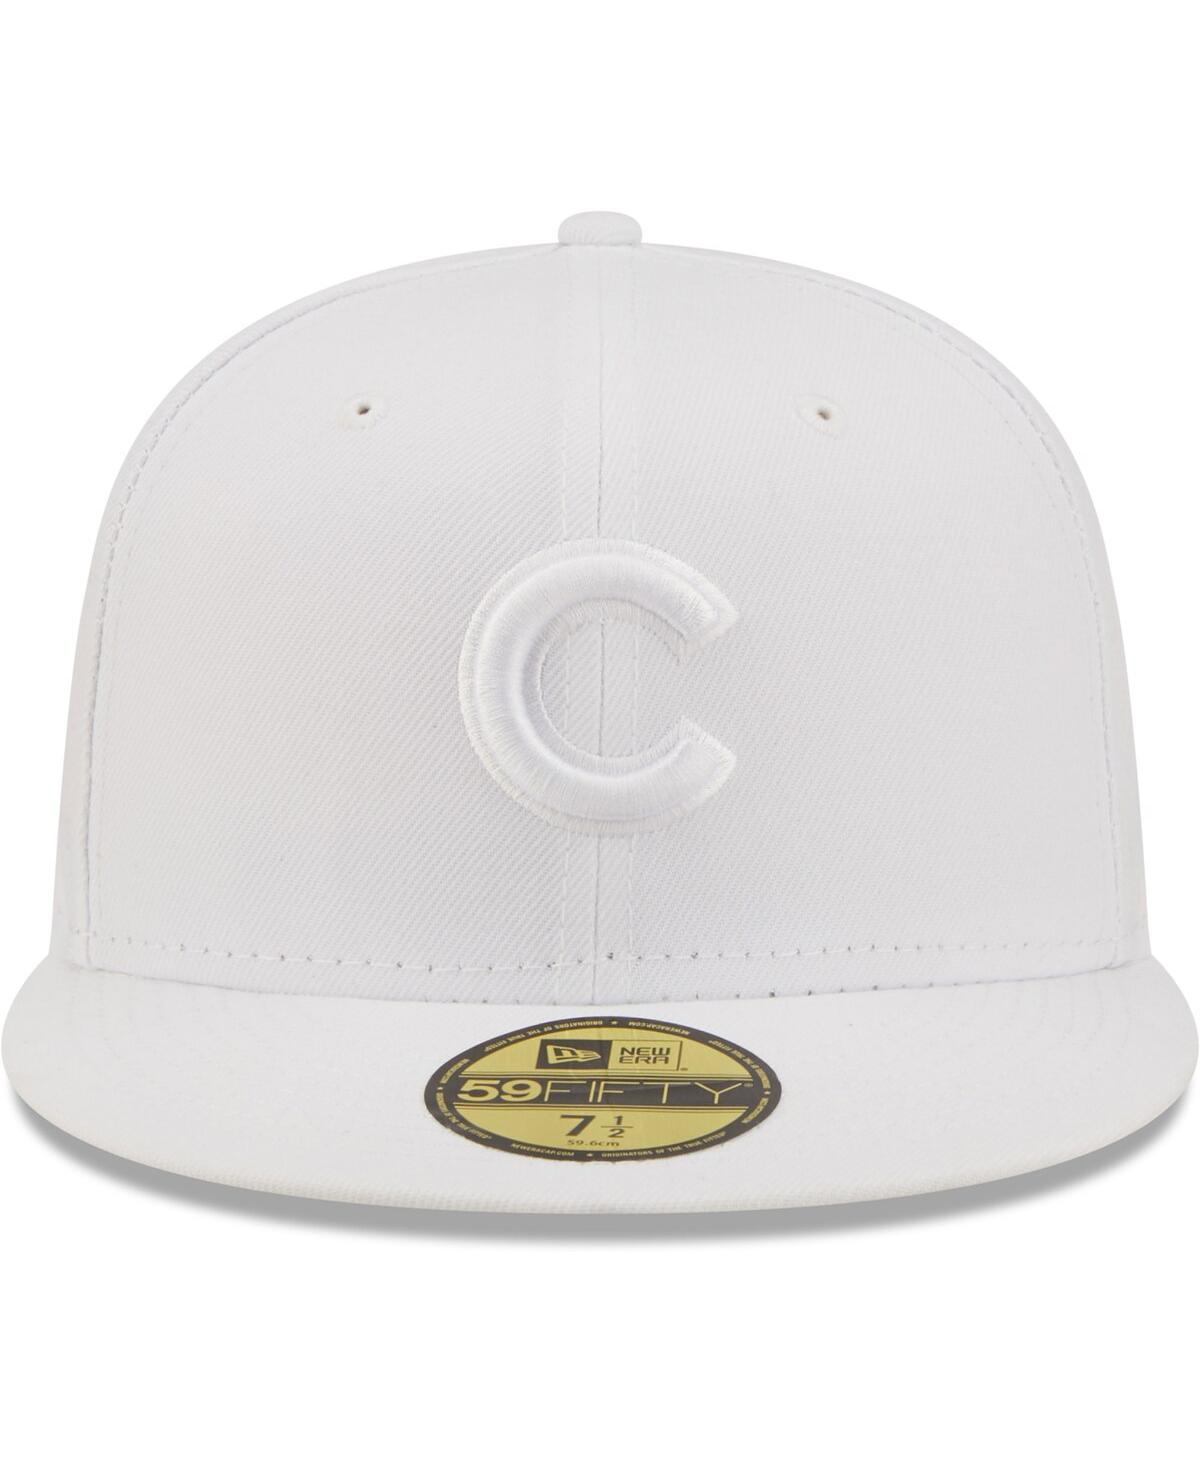 Shop New Era Men's  Chicago Cubs White On White 59fifty Fitted Hat